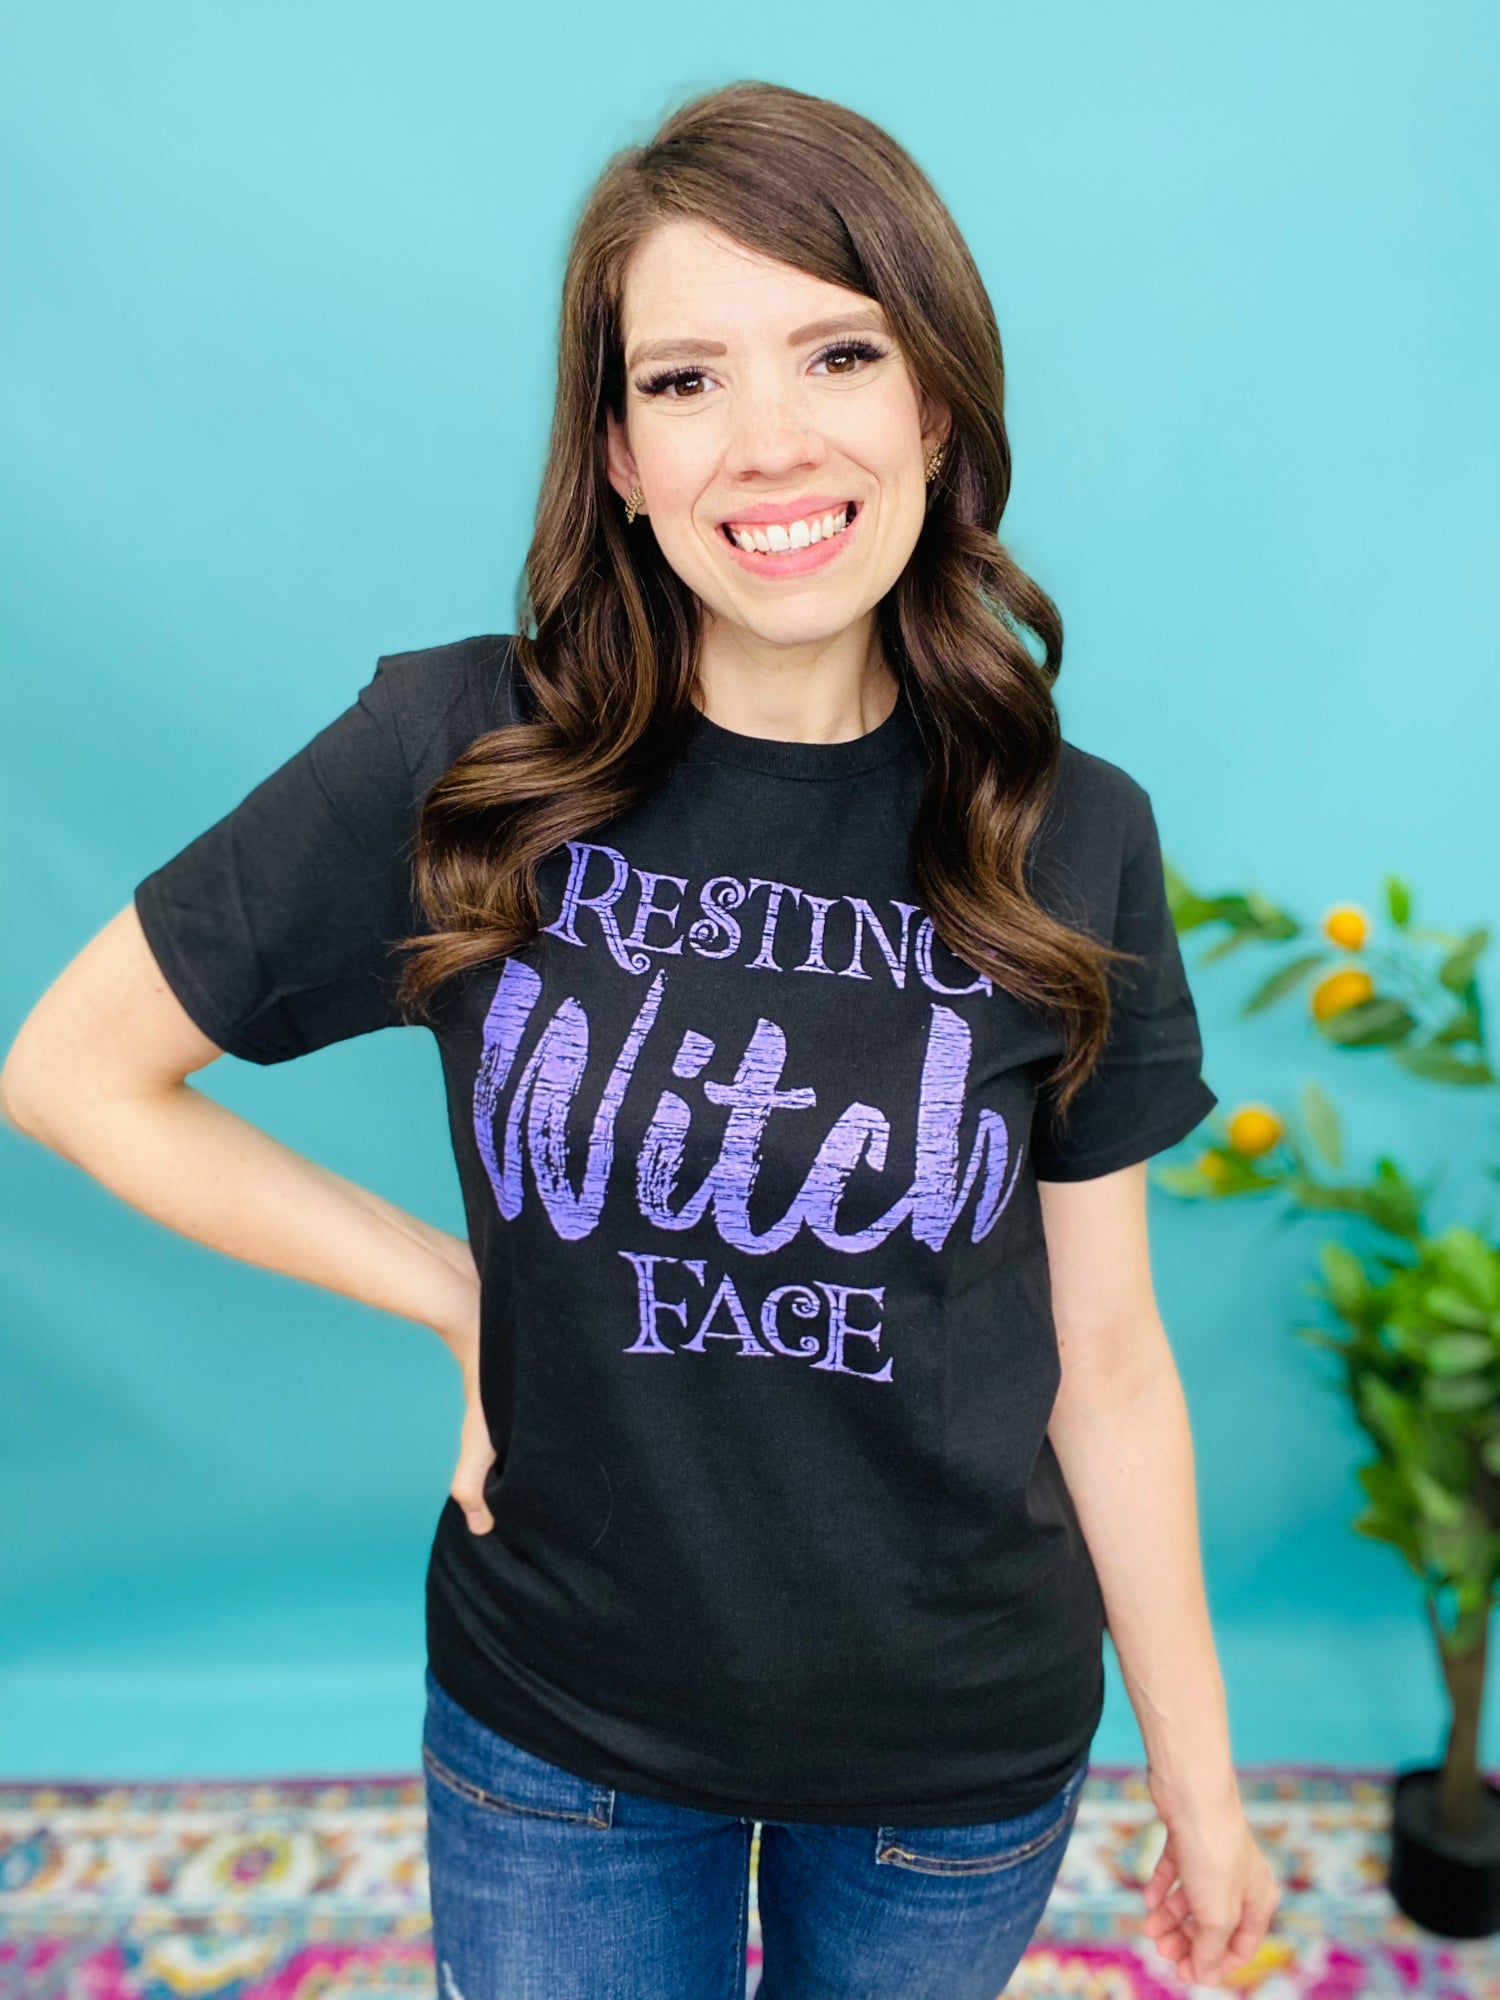 Resting Witch Face Tee